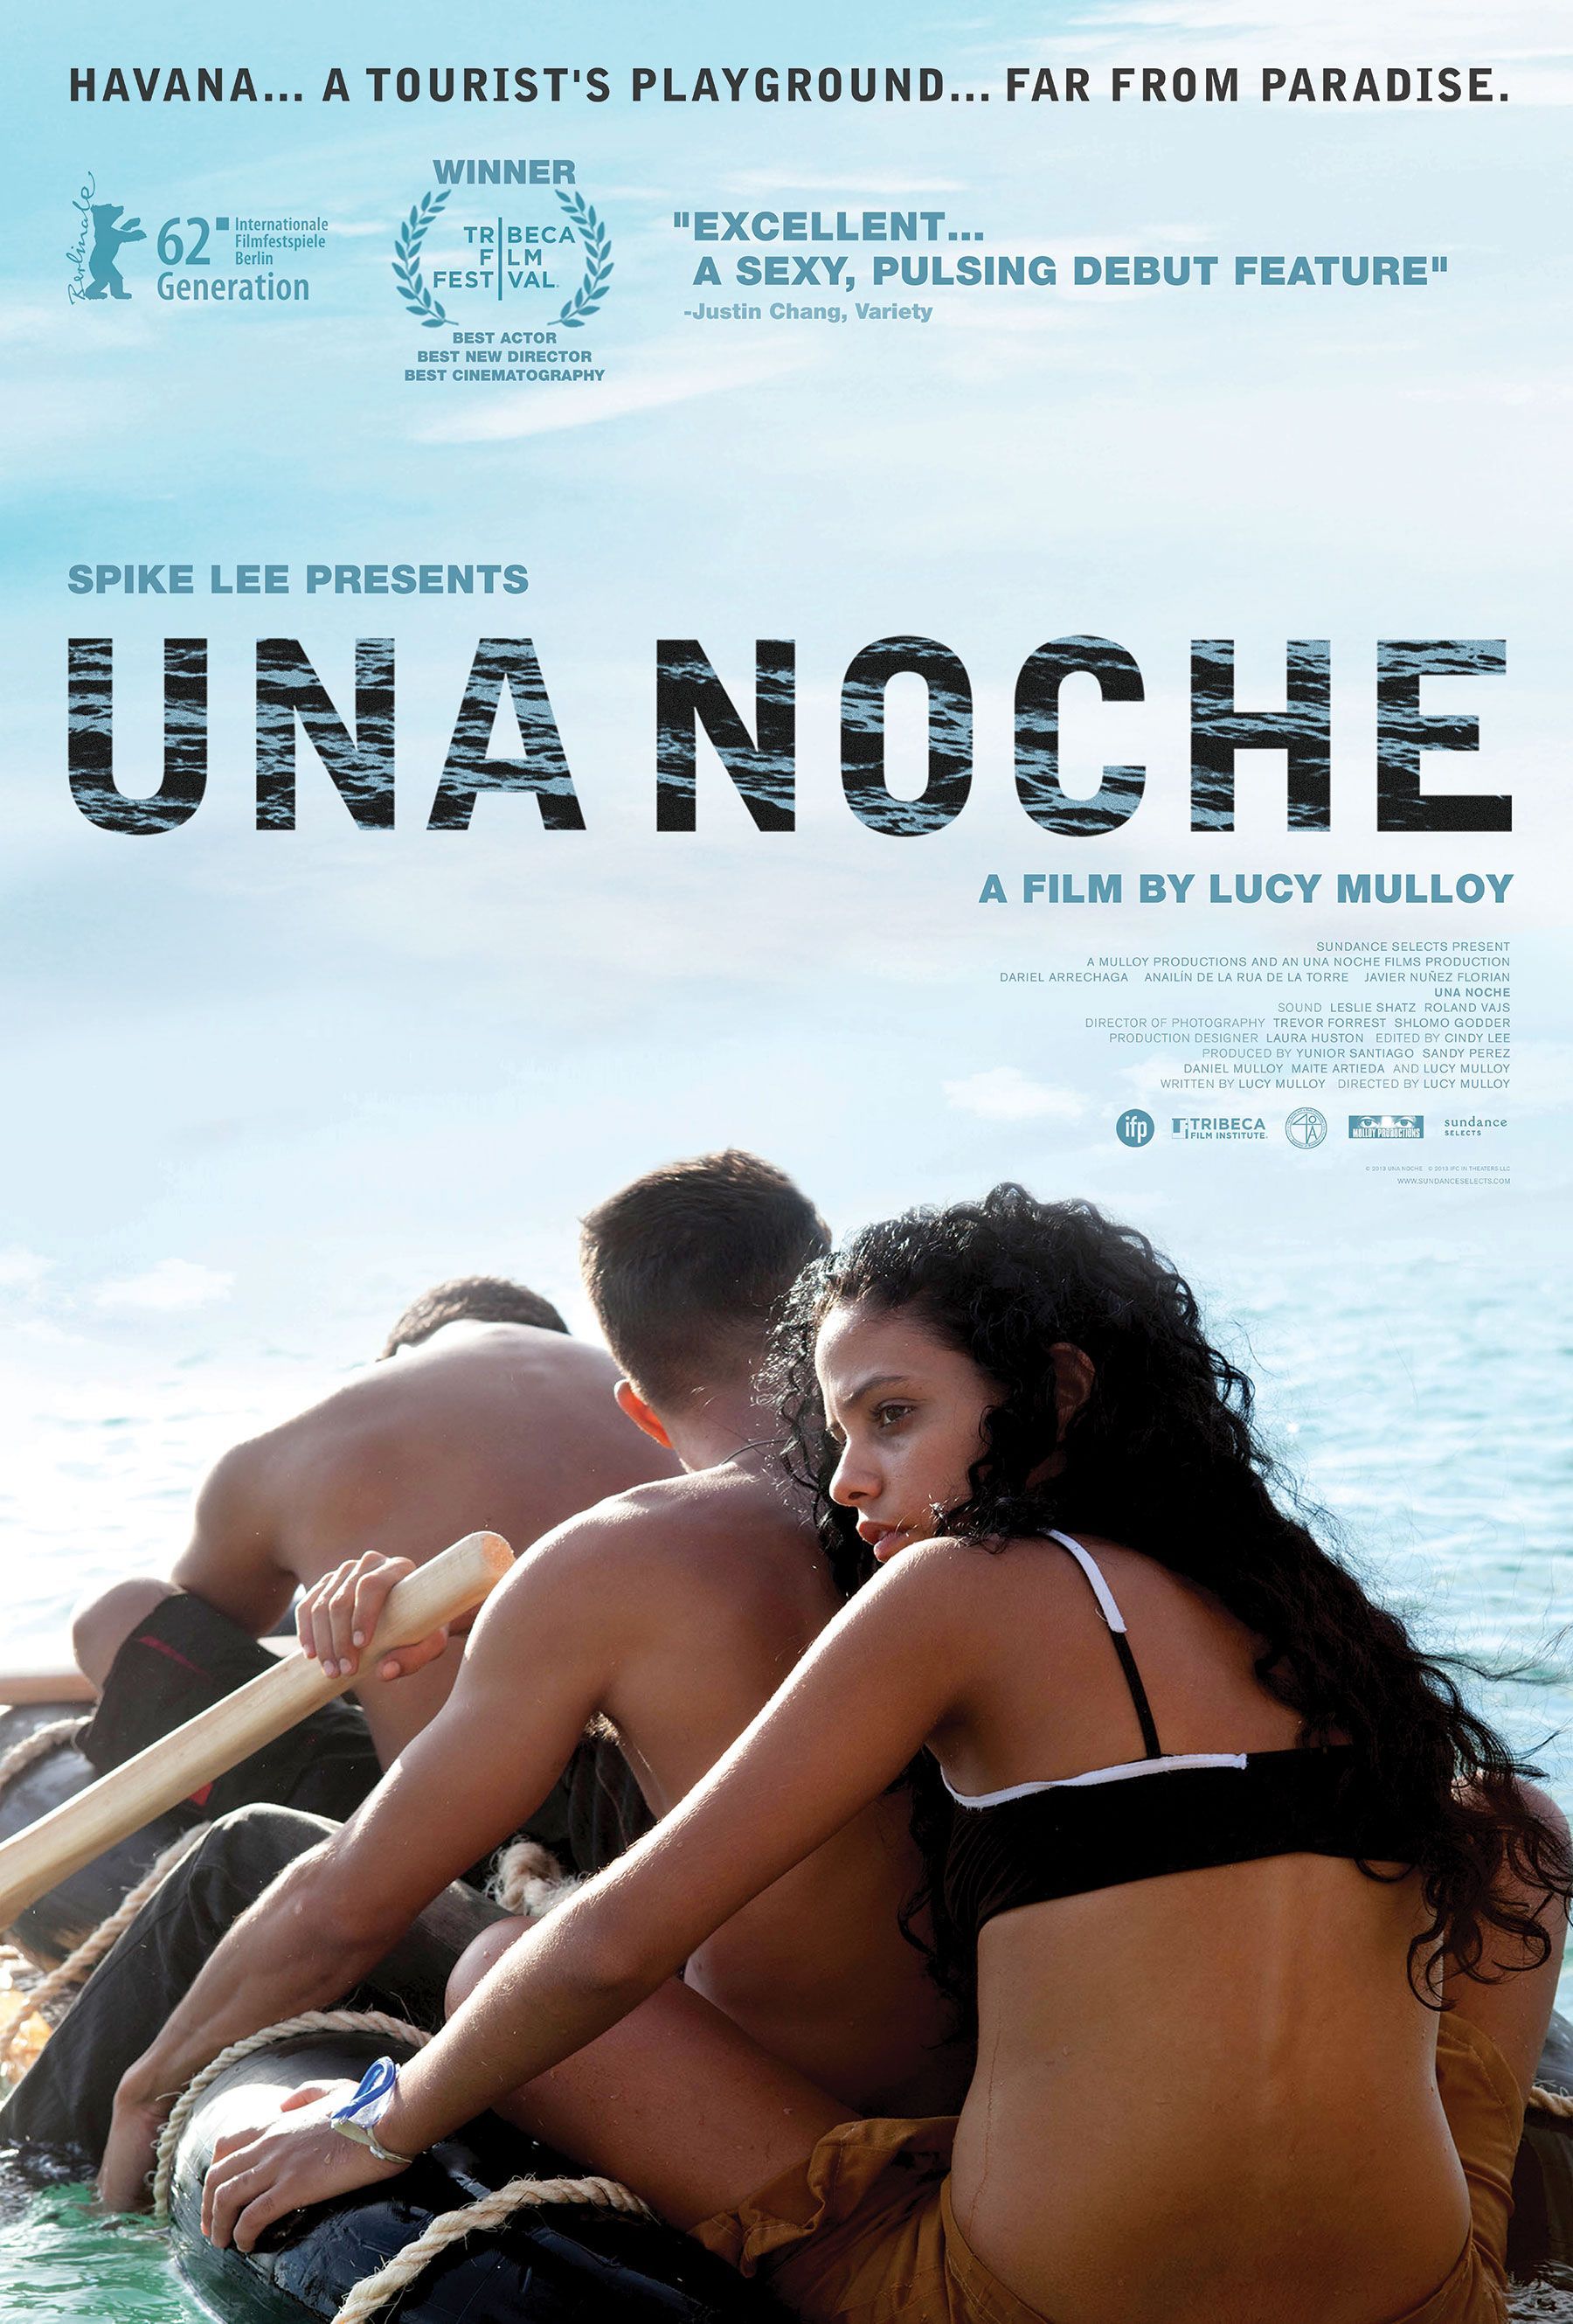 Stranger than Fiction: Filmmaker Lucy Mulloy on Cuba, Una Noche and the Character-Driven Drama 